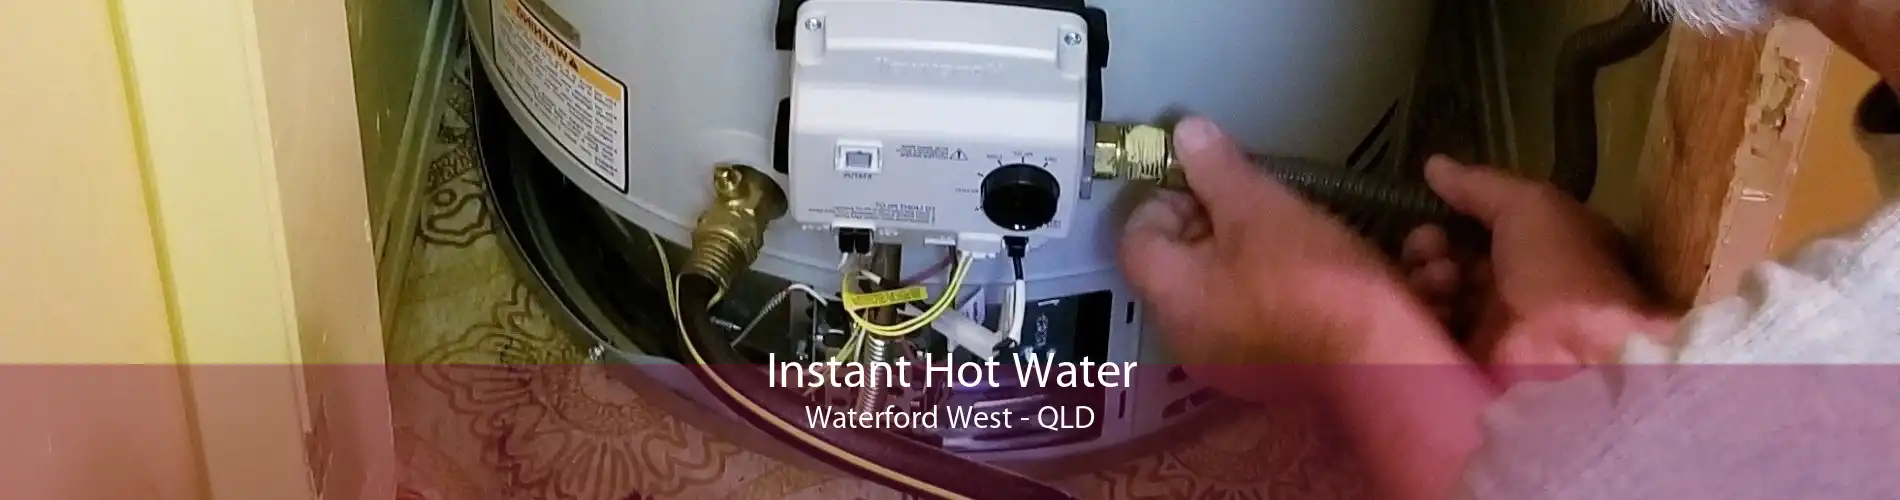 Instant Hot Water Waterford West - QLD